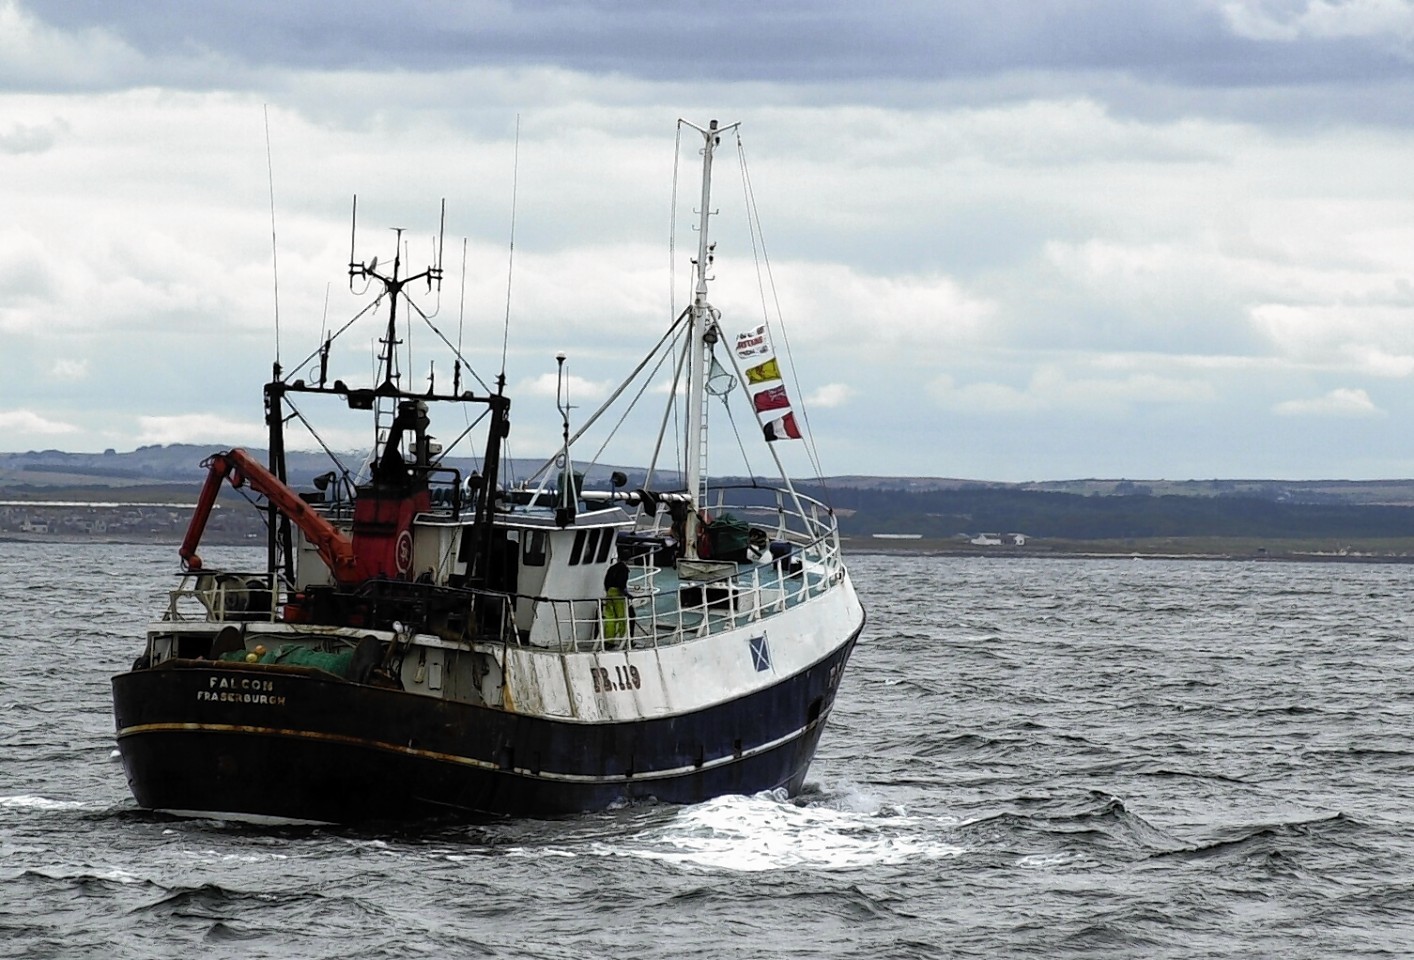 A fishing trawler heads out to sea, they've come a long way since the Fairtry